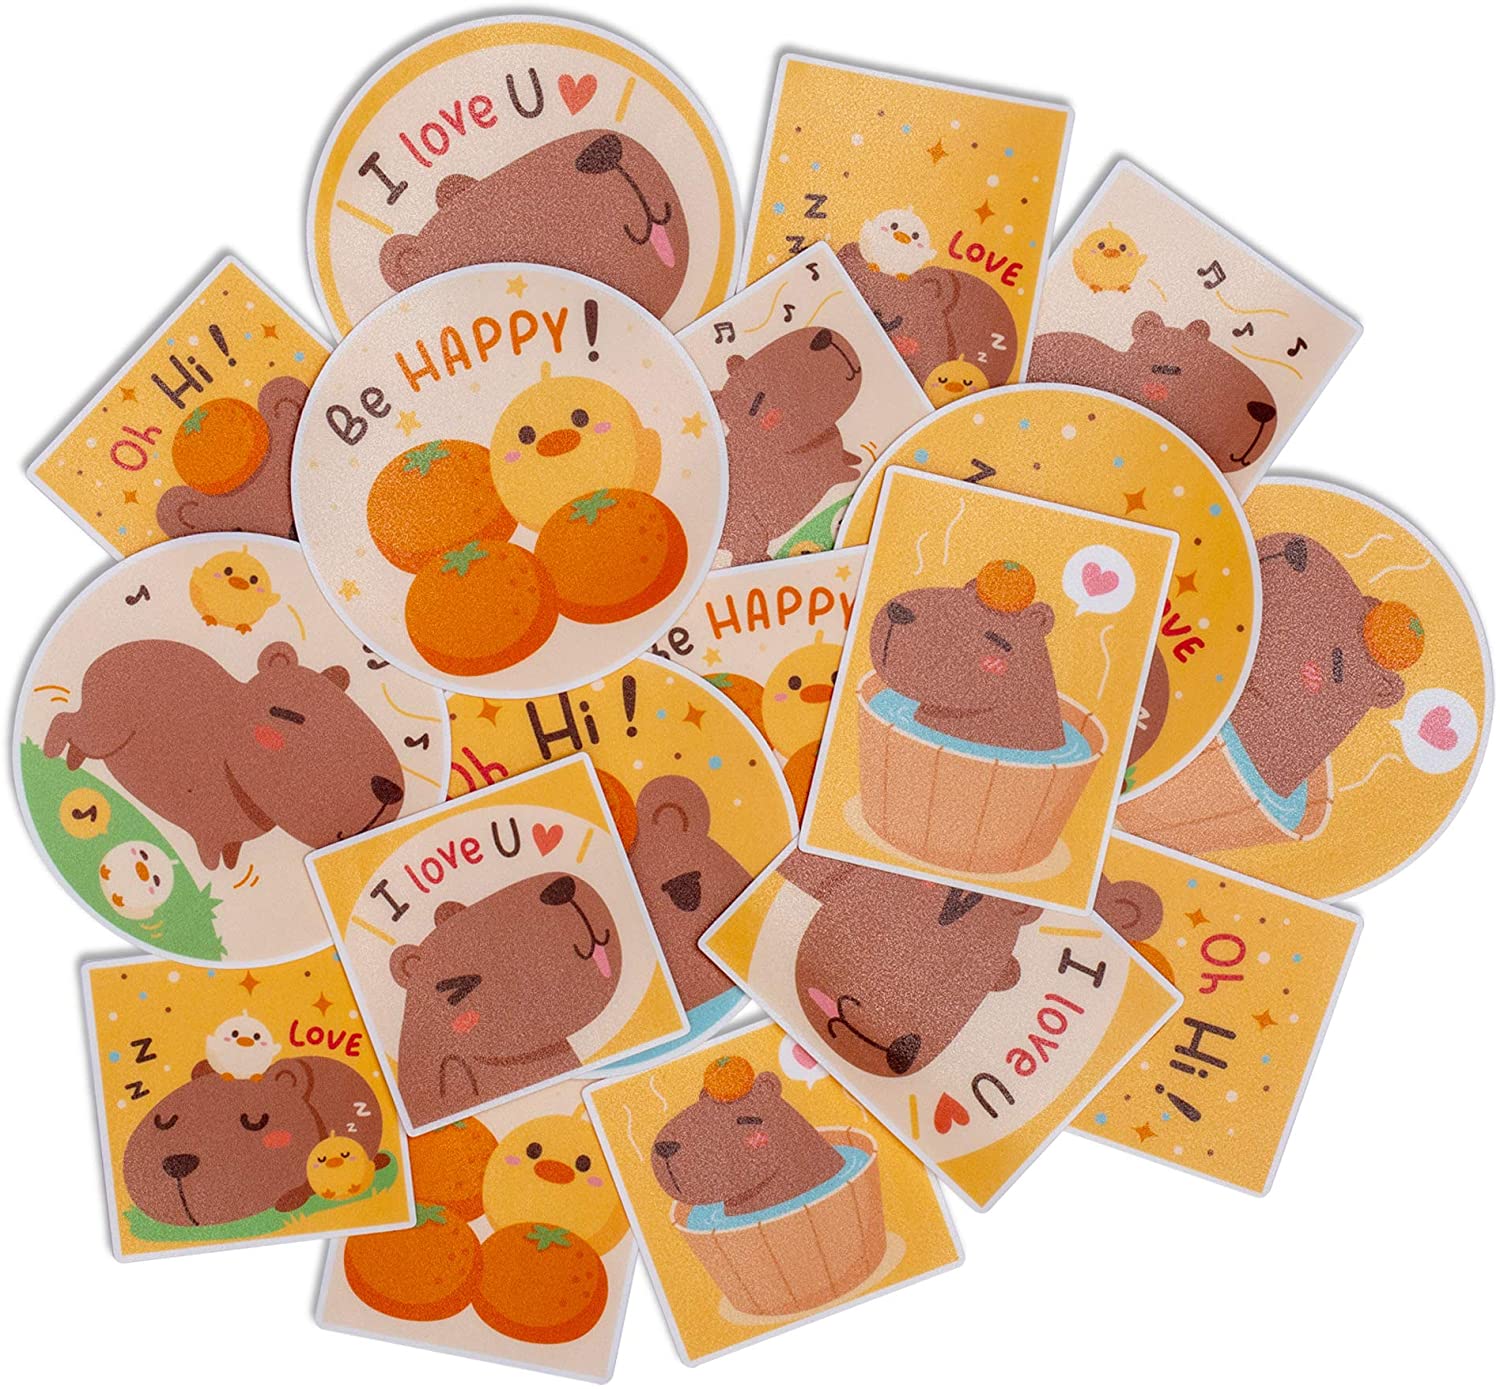 18pcs Cute Capybara Sticker Pack Animal Themed Square Vertical and Round Stickers Decals for Journals - Capybara Plush